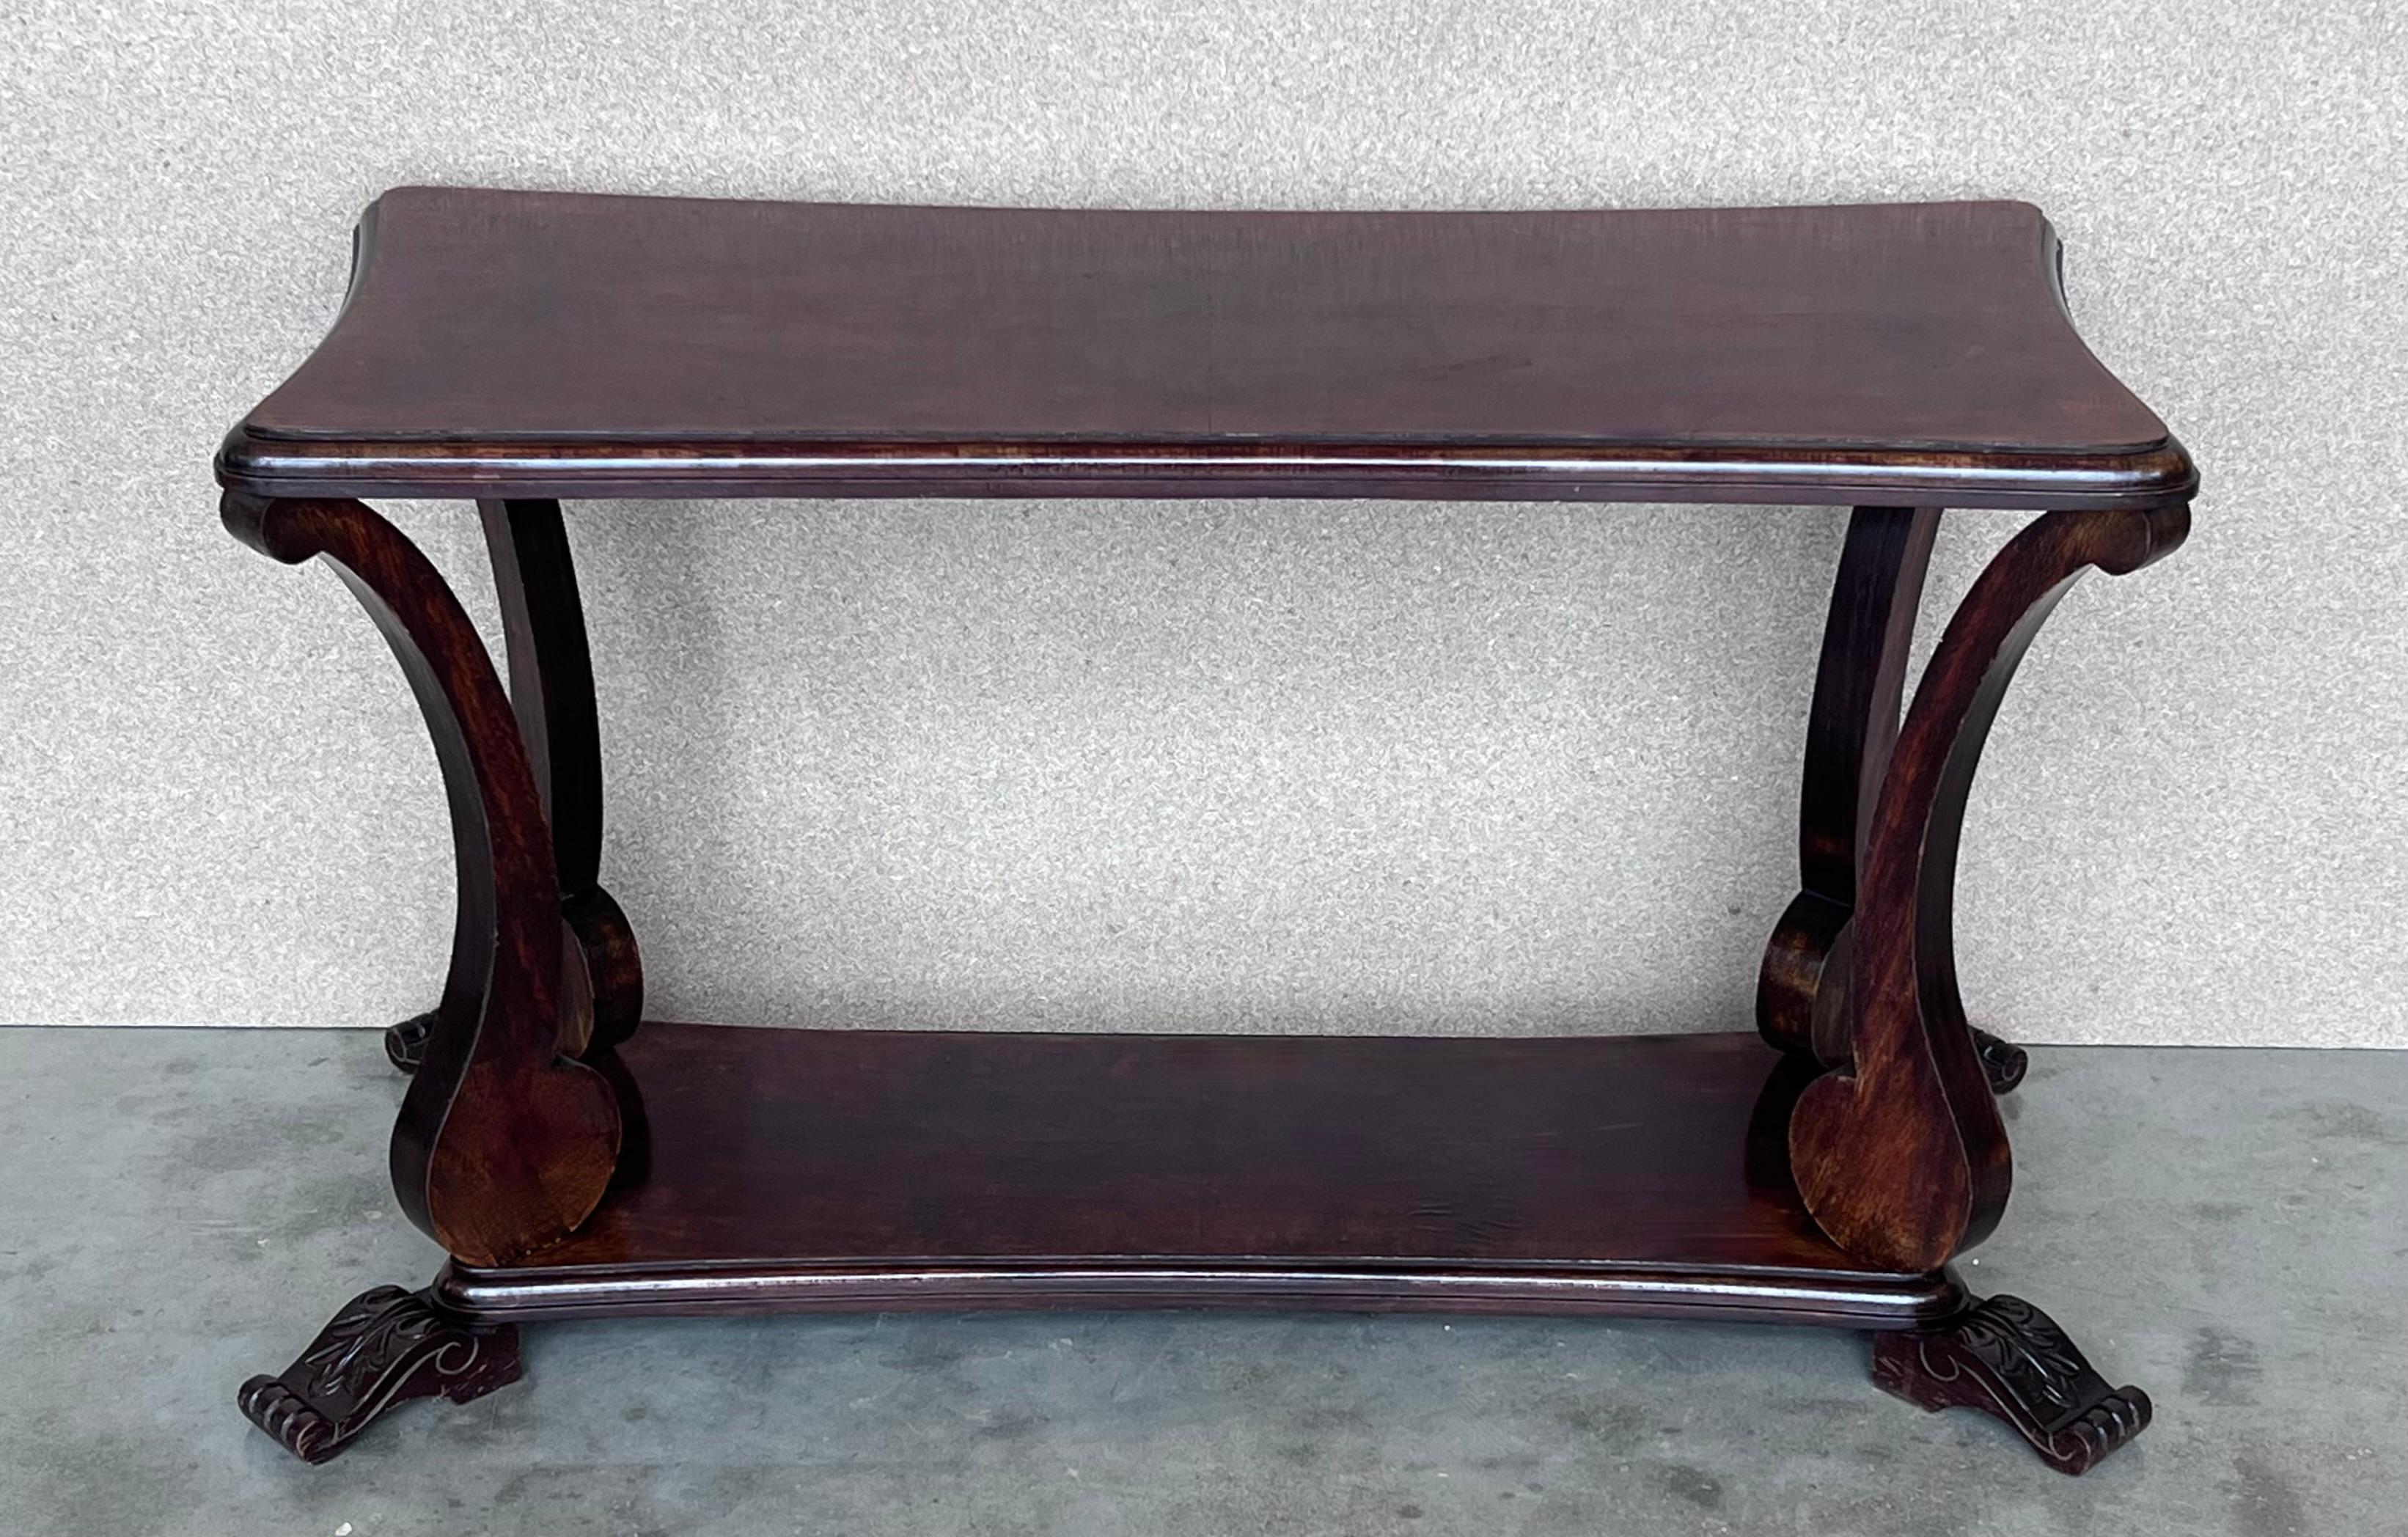 French Provincial Early 20th Century Mahogany Rectangular Coffee Table with Low Shelve For Sale